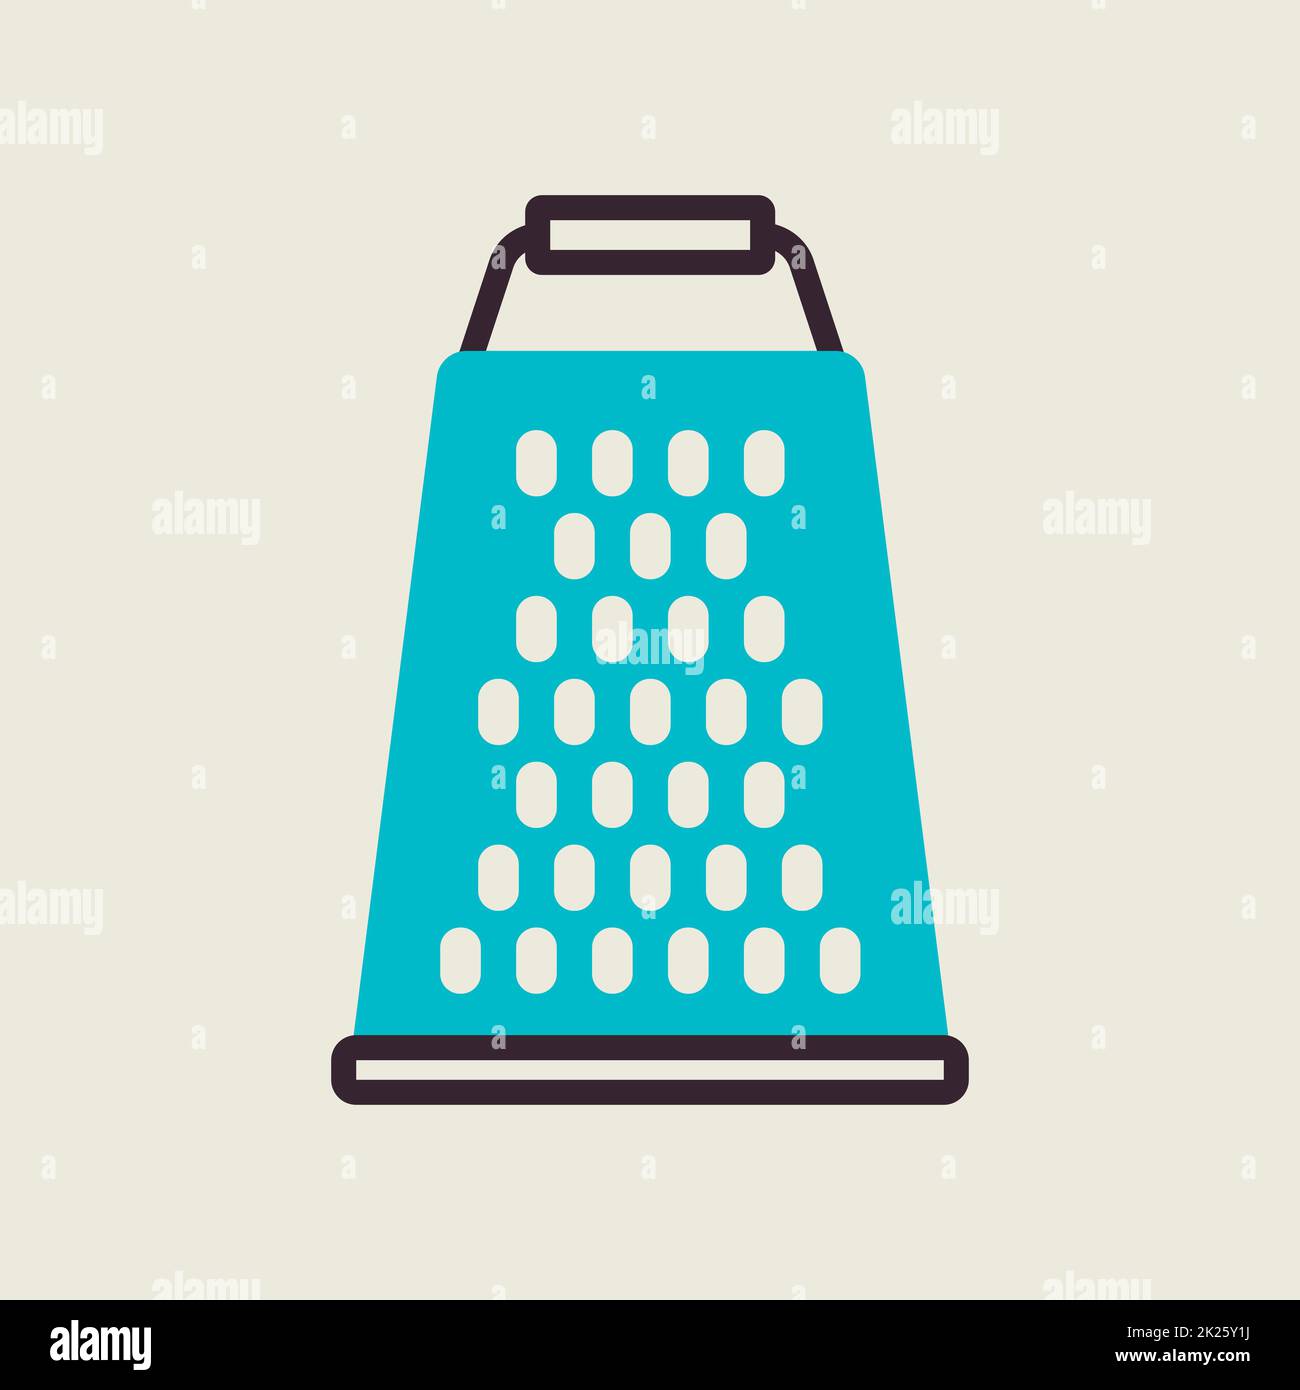 Grater vector icon. Kitchen appliance Stock Photo